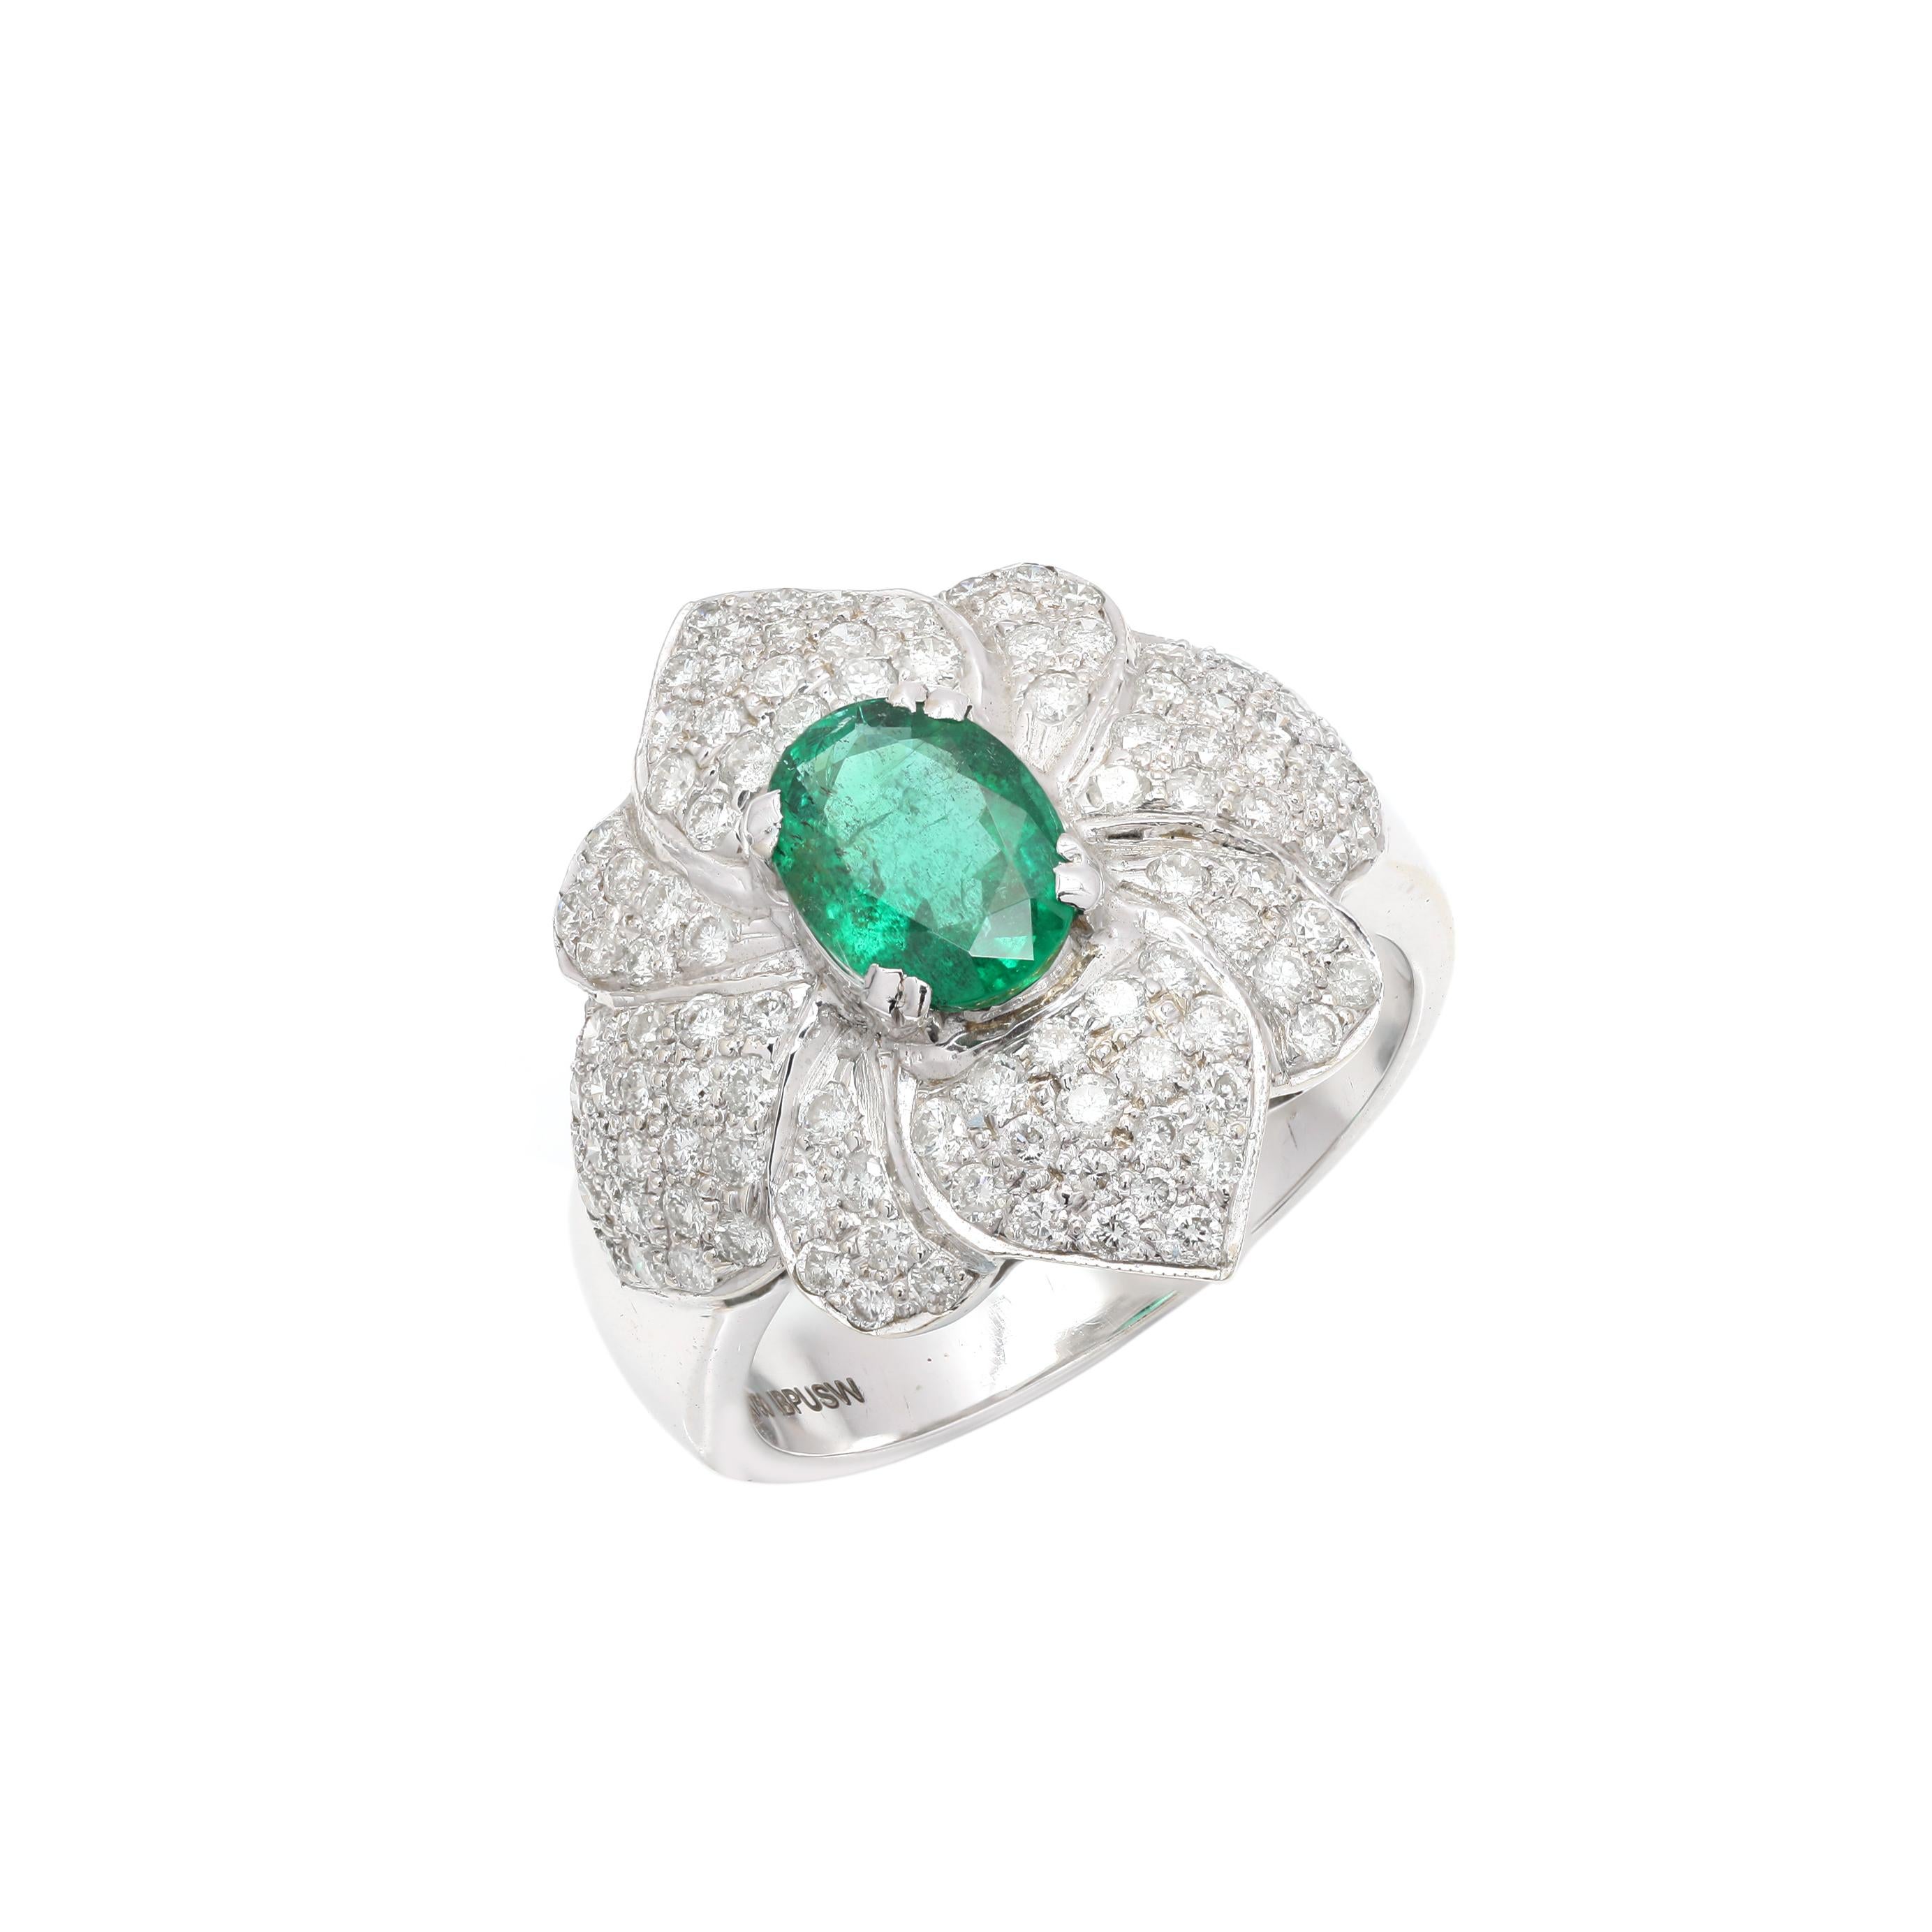 For Sale:  Designer Diamond and Emerald Floral Statement Ring in Solid 18k White Gold 3